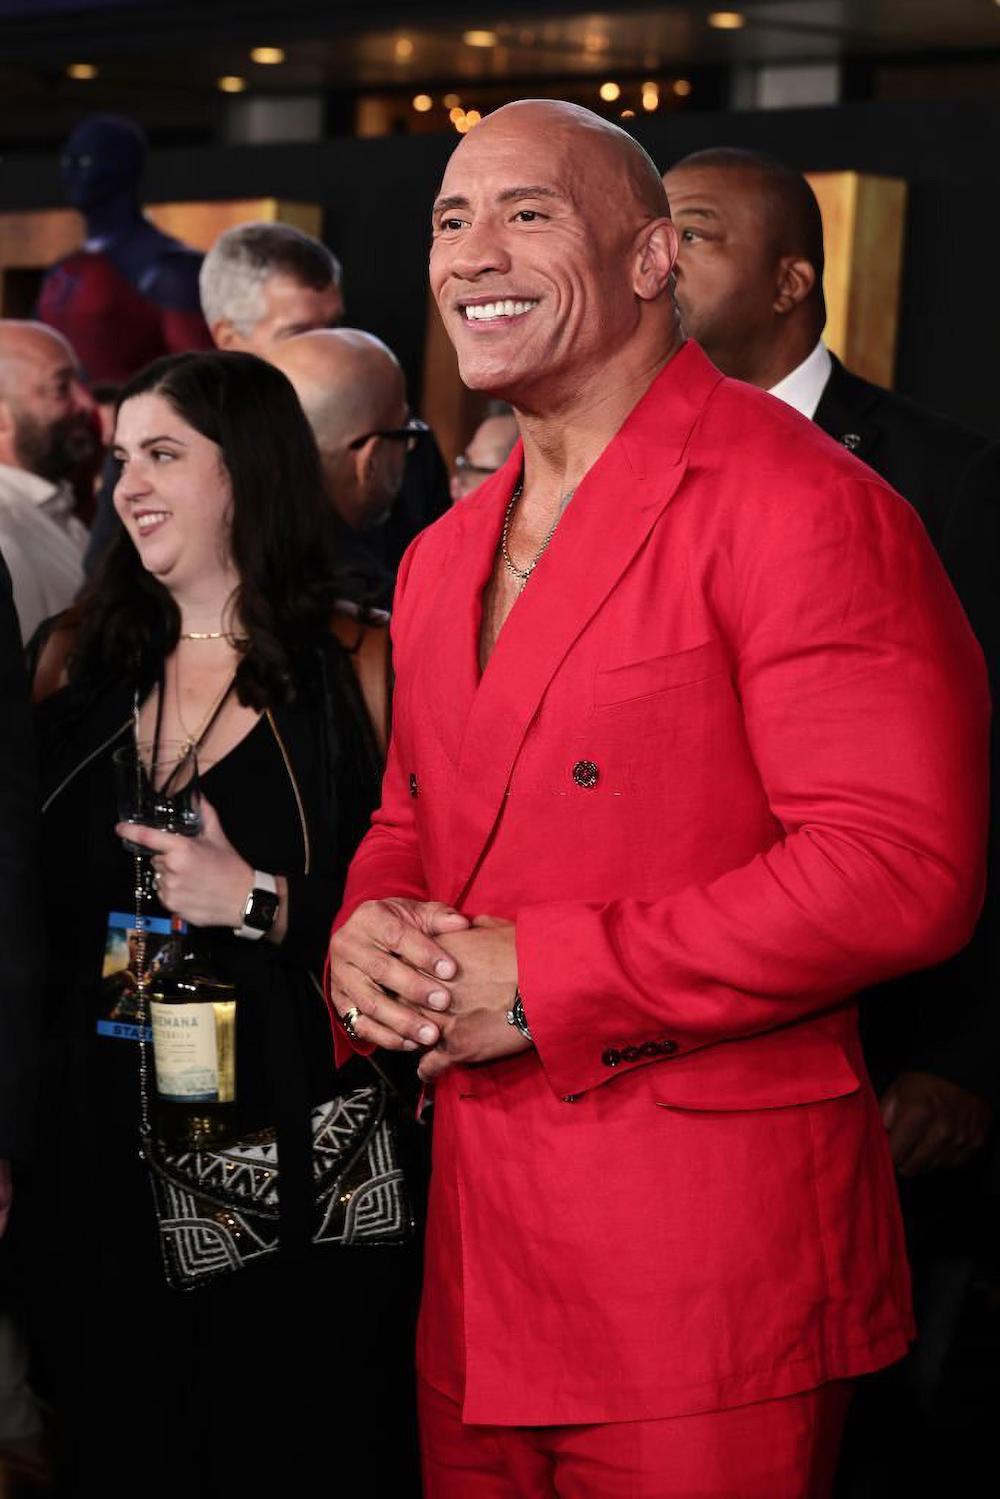 Dwayne, who plays the role of Black Adam in a red D&G suit.